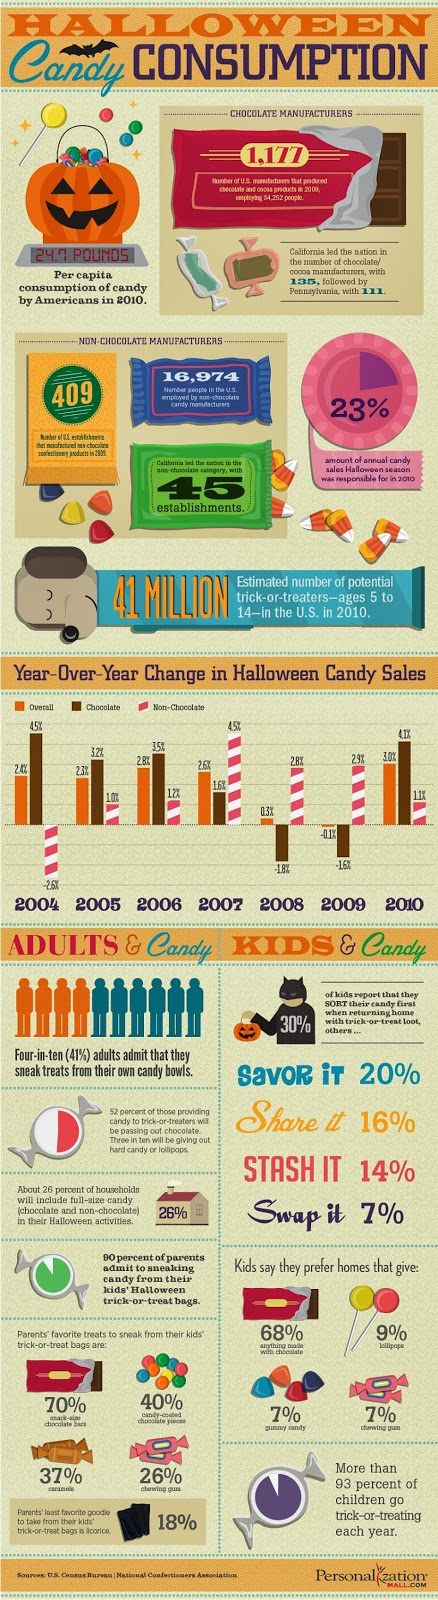 Truly interesting facts about Halloween candy